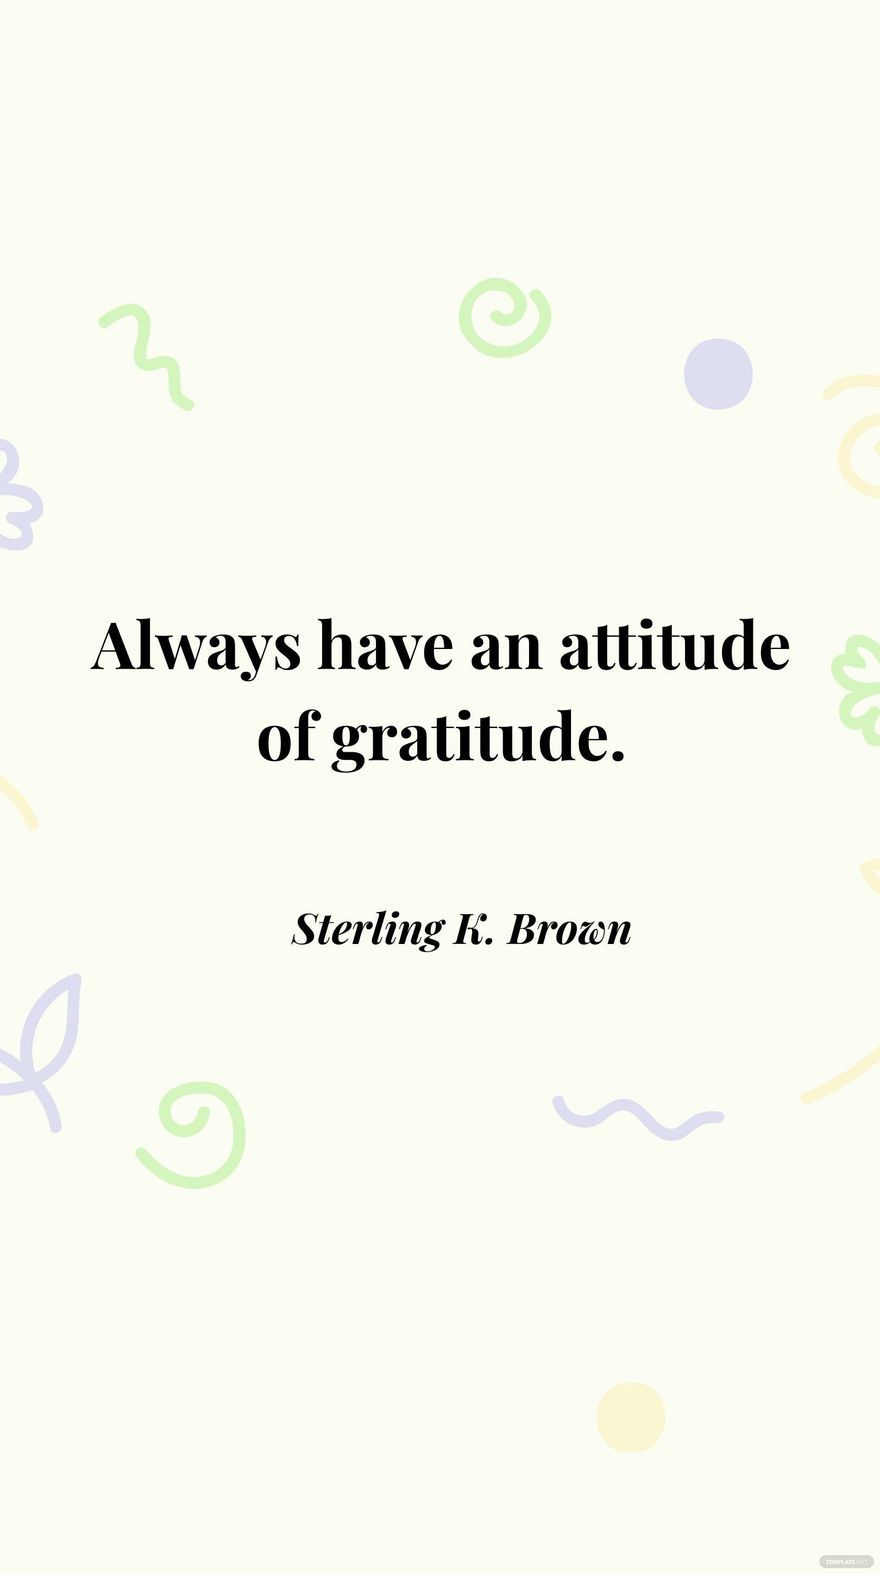 Free Sterling K. Brown - Always have an attitude of gratitude. in JPG